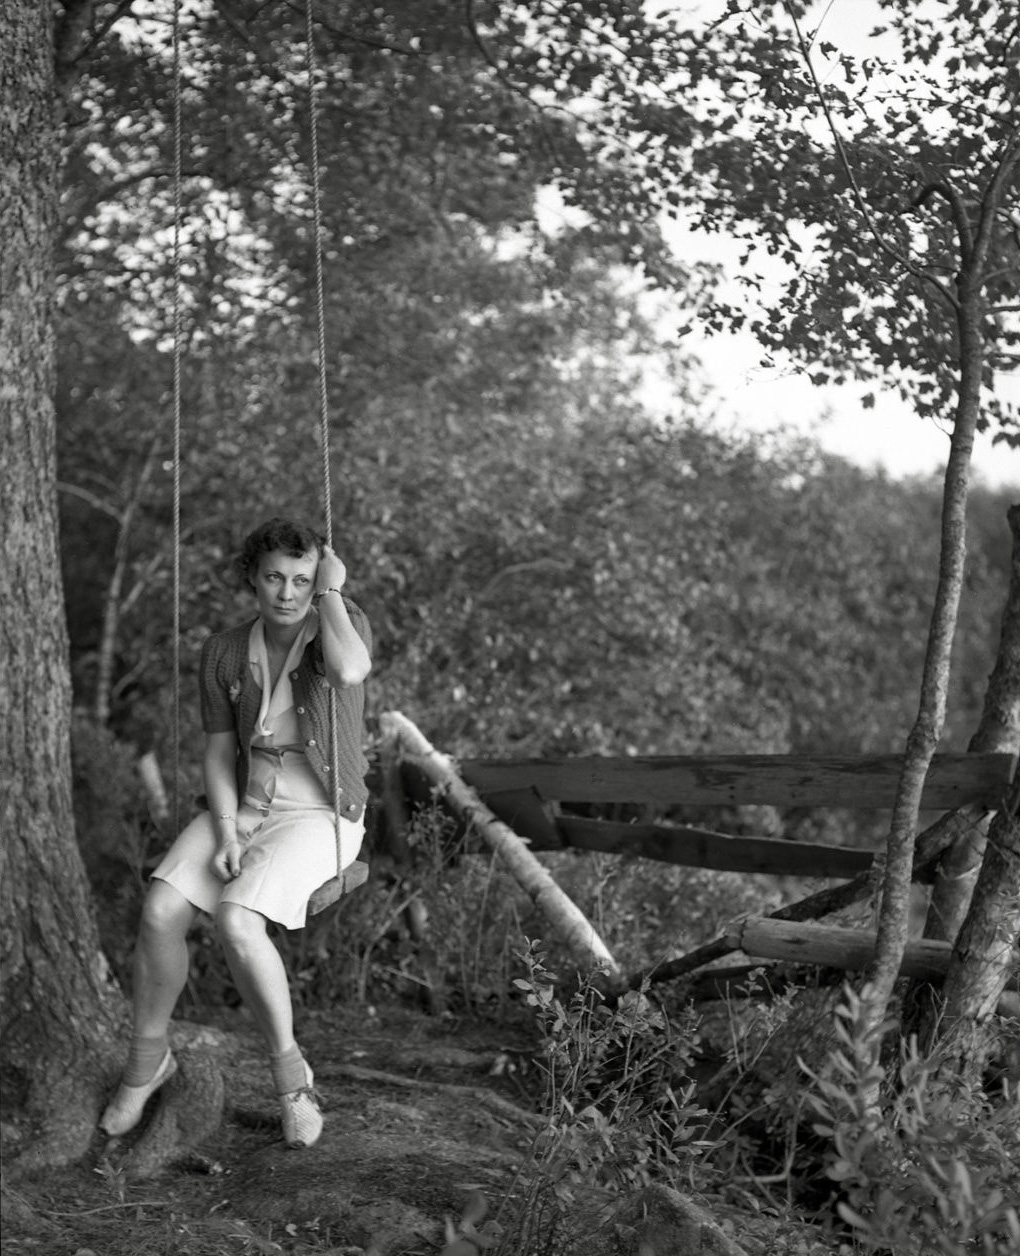 From my negatives collection. Was in an envelope titled "Ebba on Swing" I think it's a really neat shot. View full size.